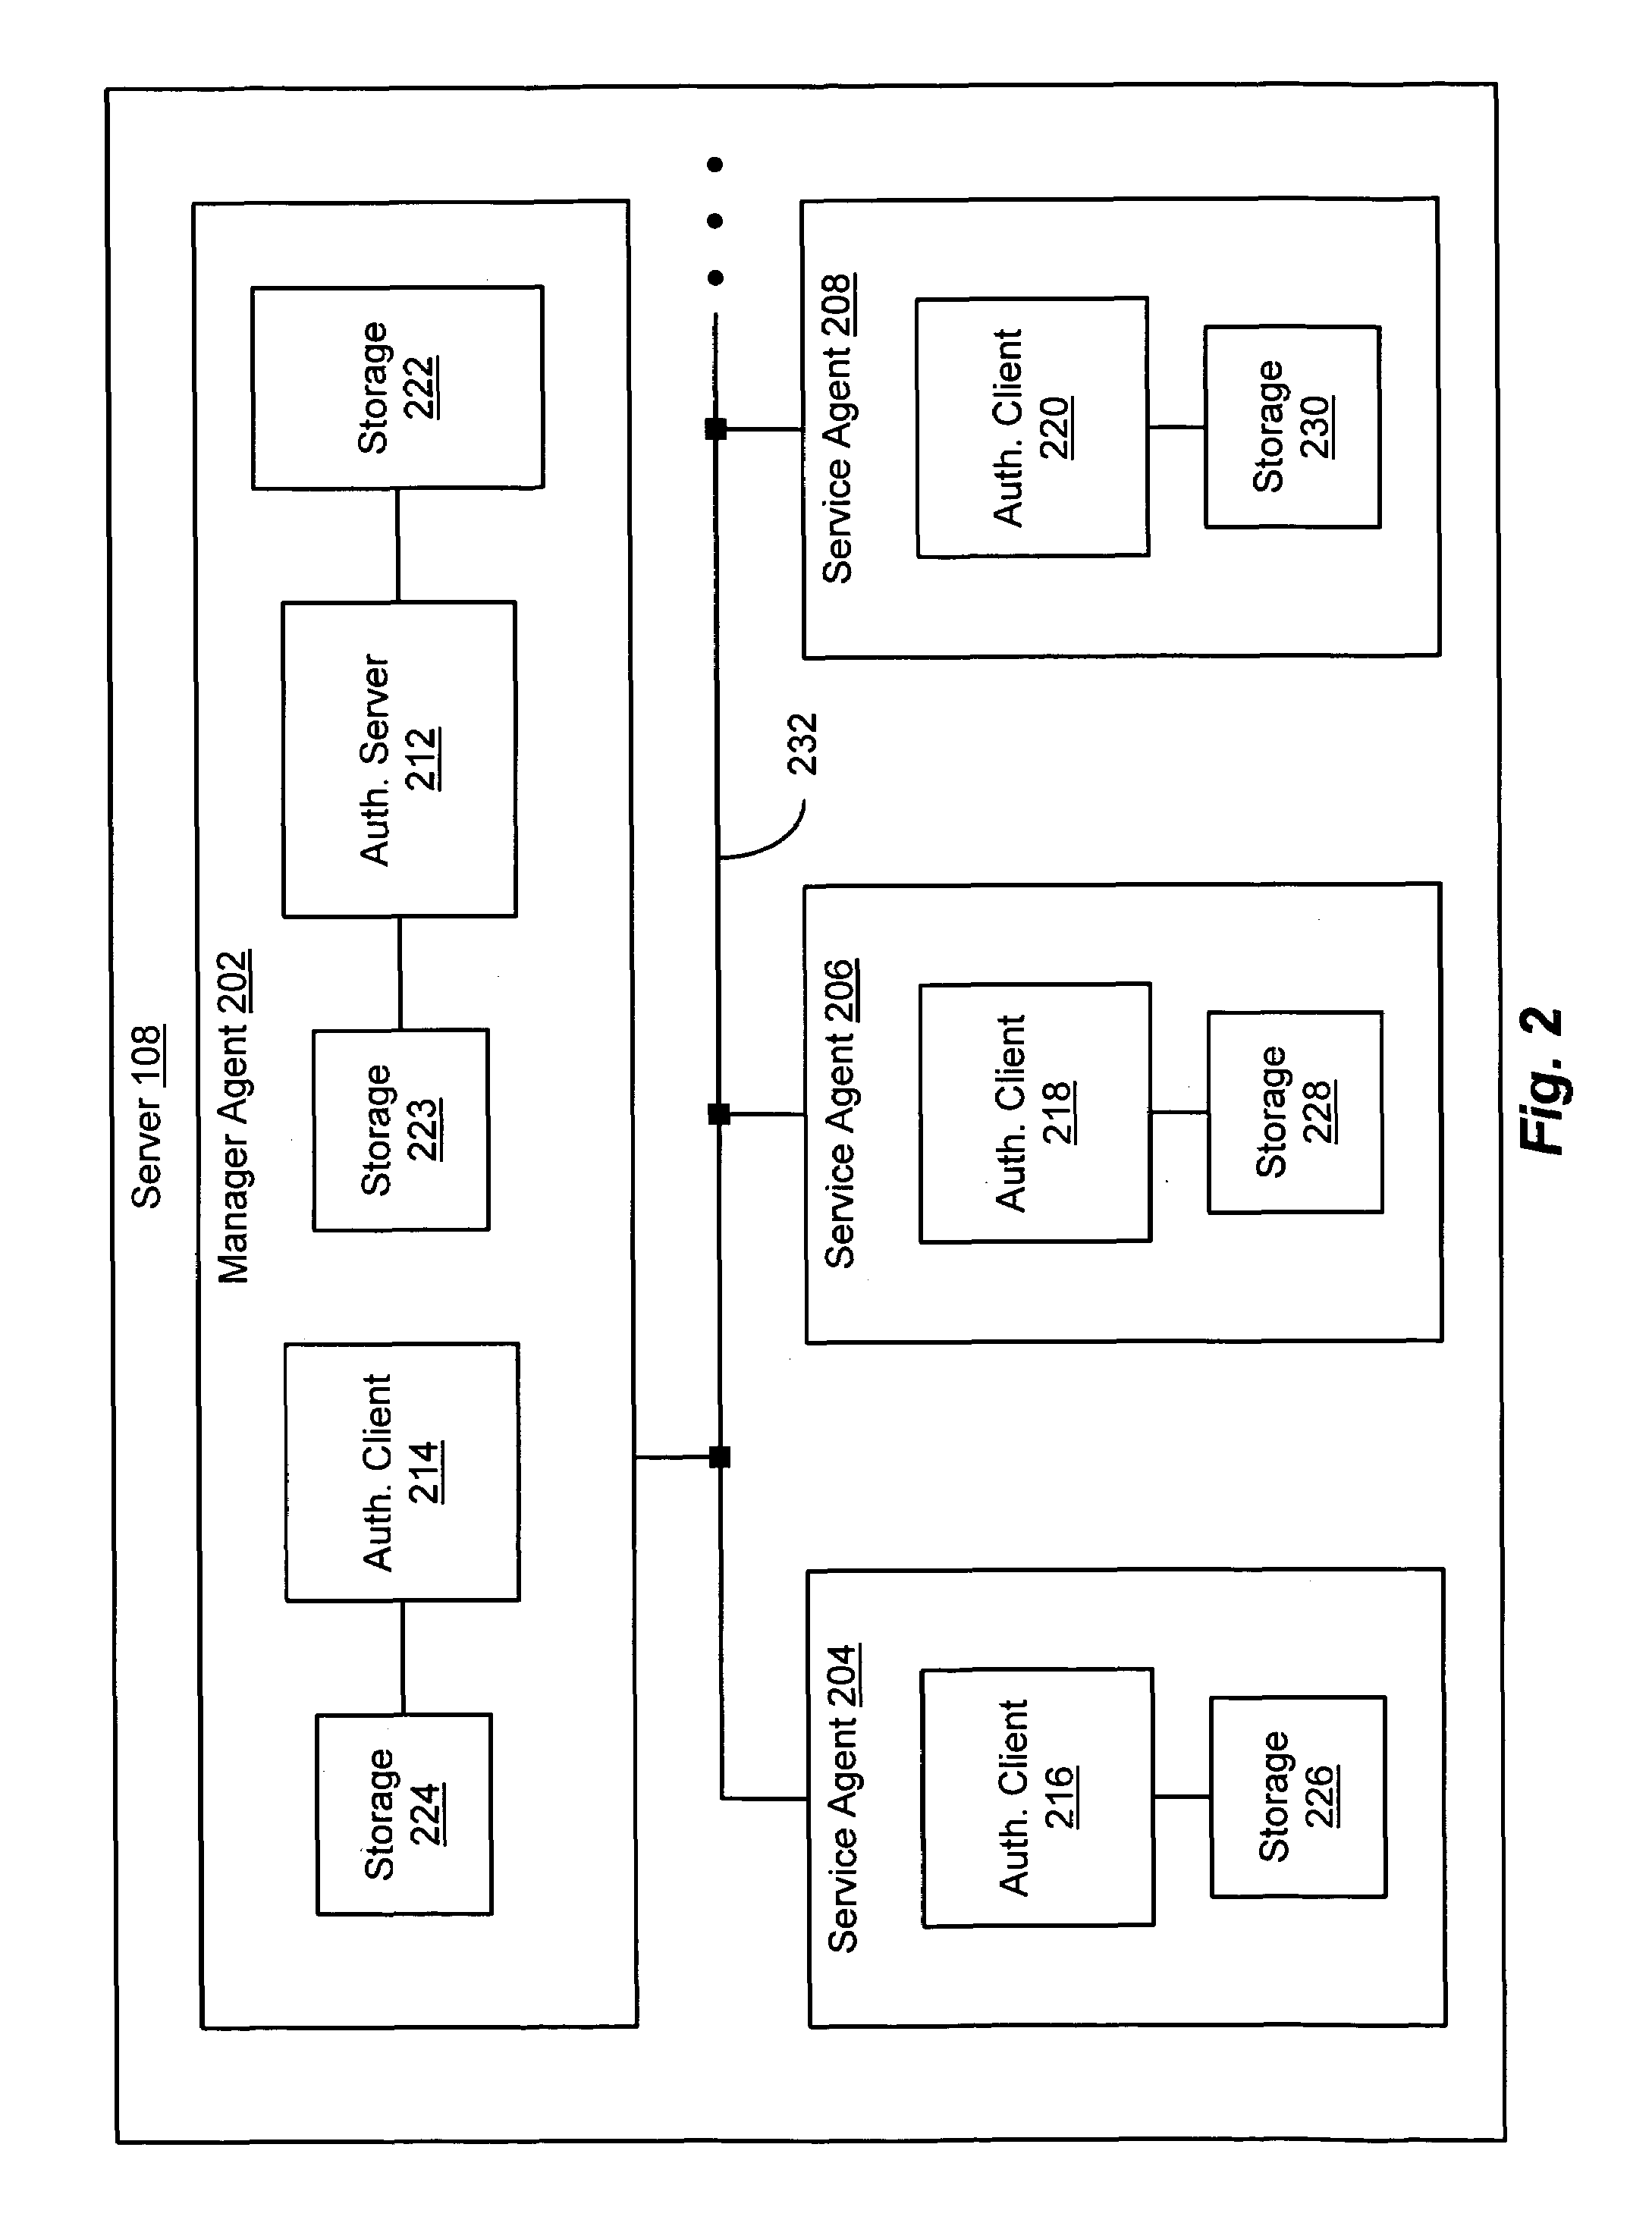 Distributed system authentication